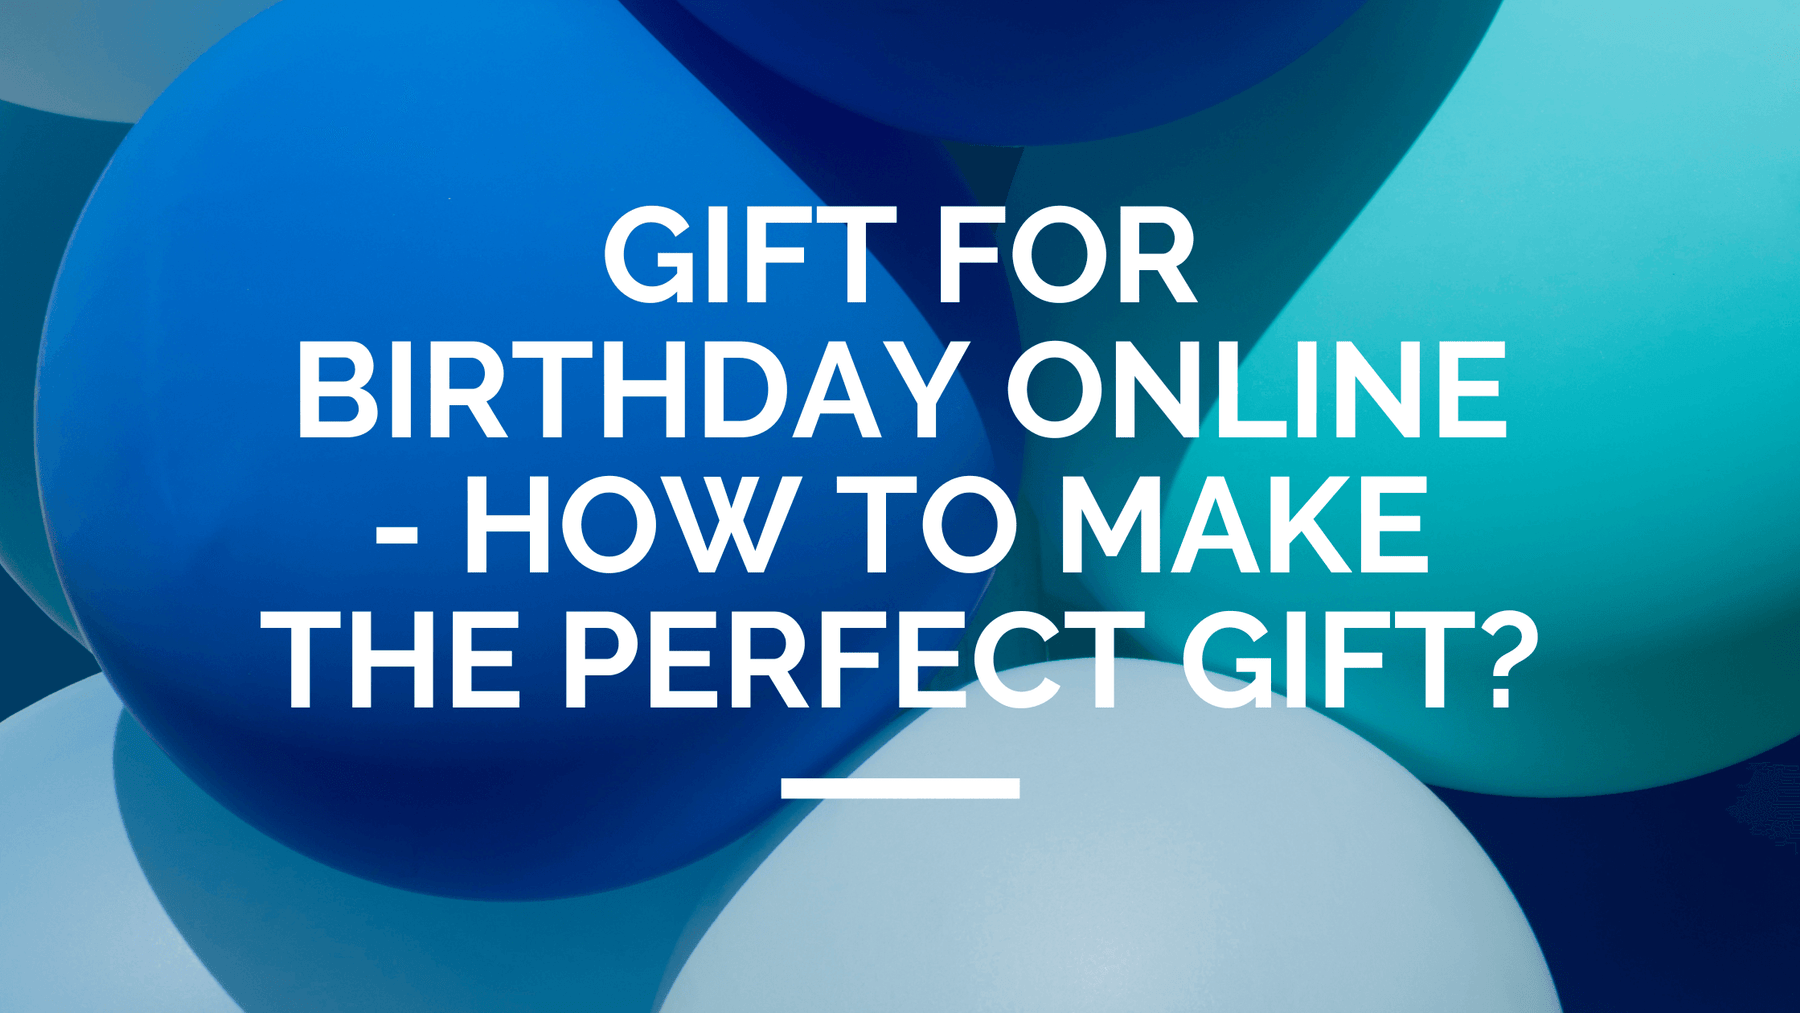 Gift for Birthday Online - How to Make the Perfect Gift?